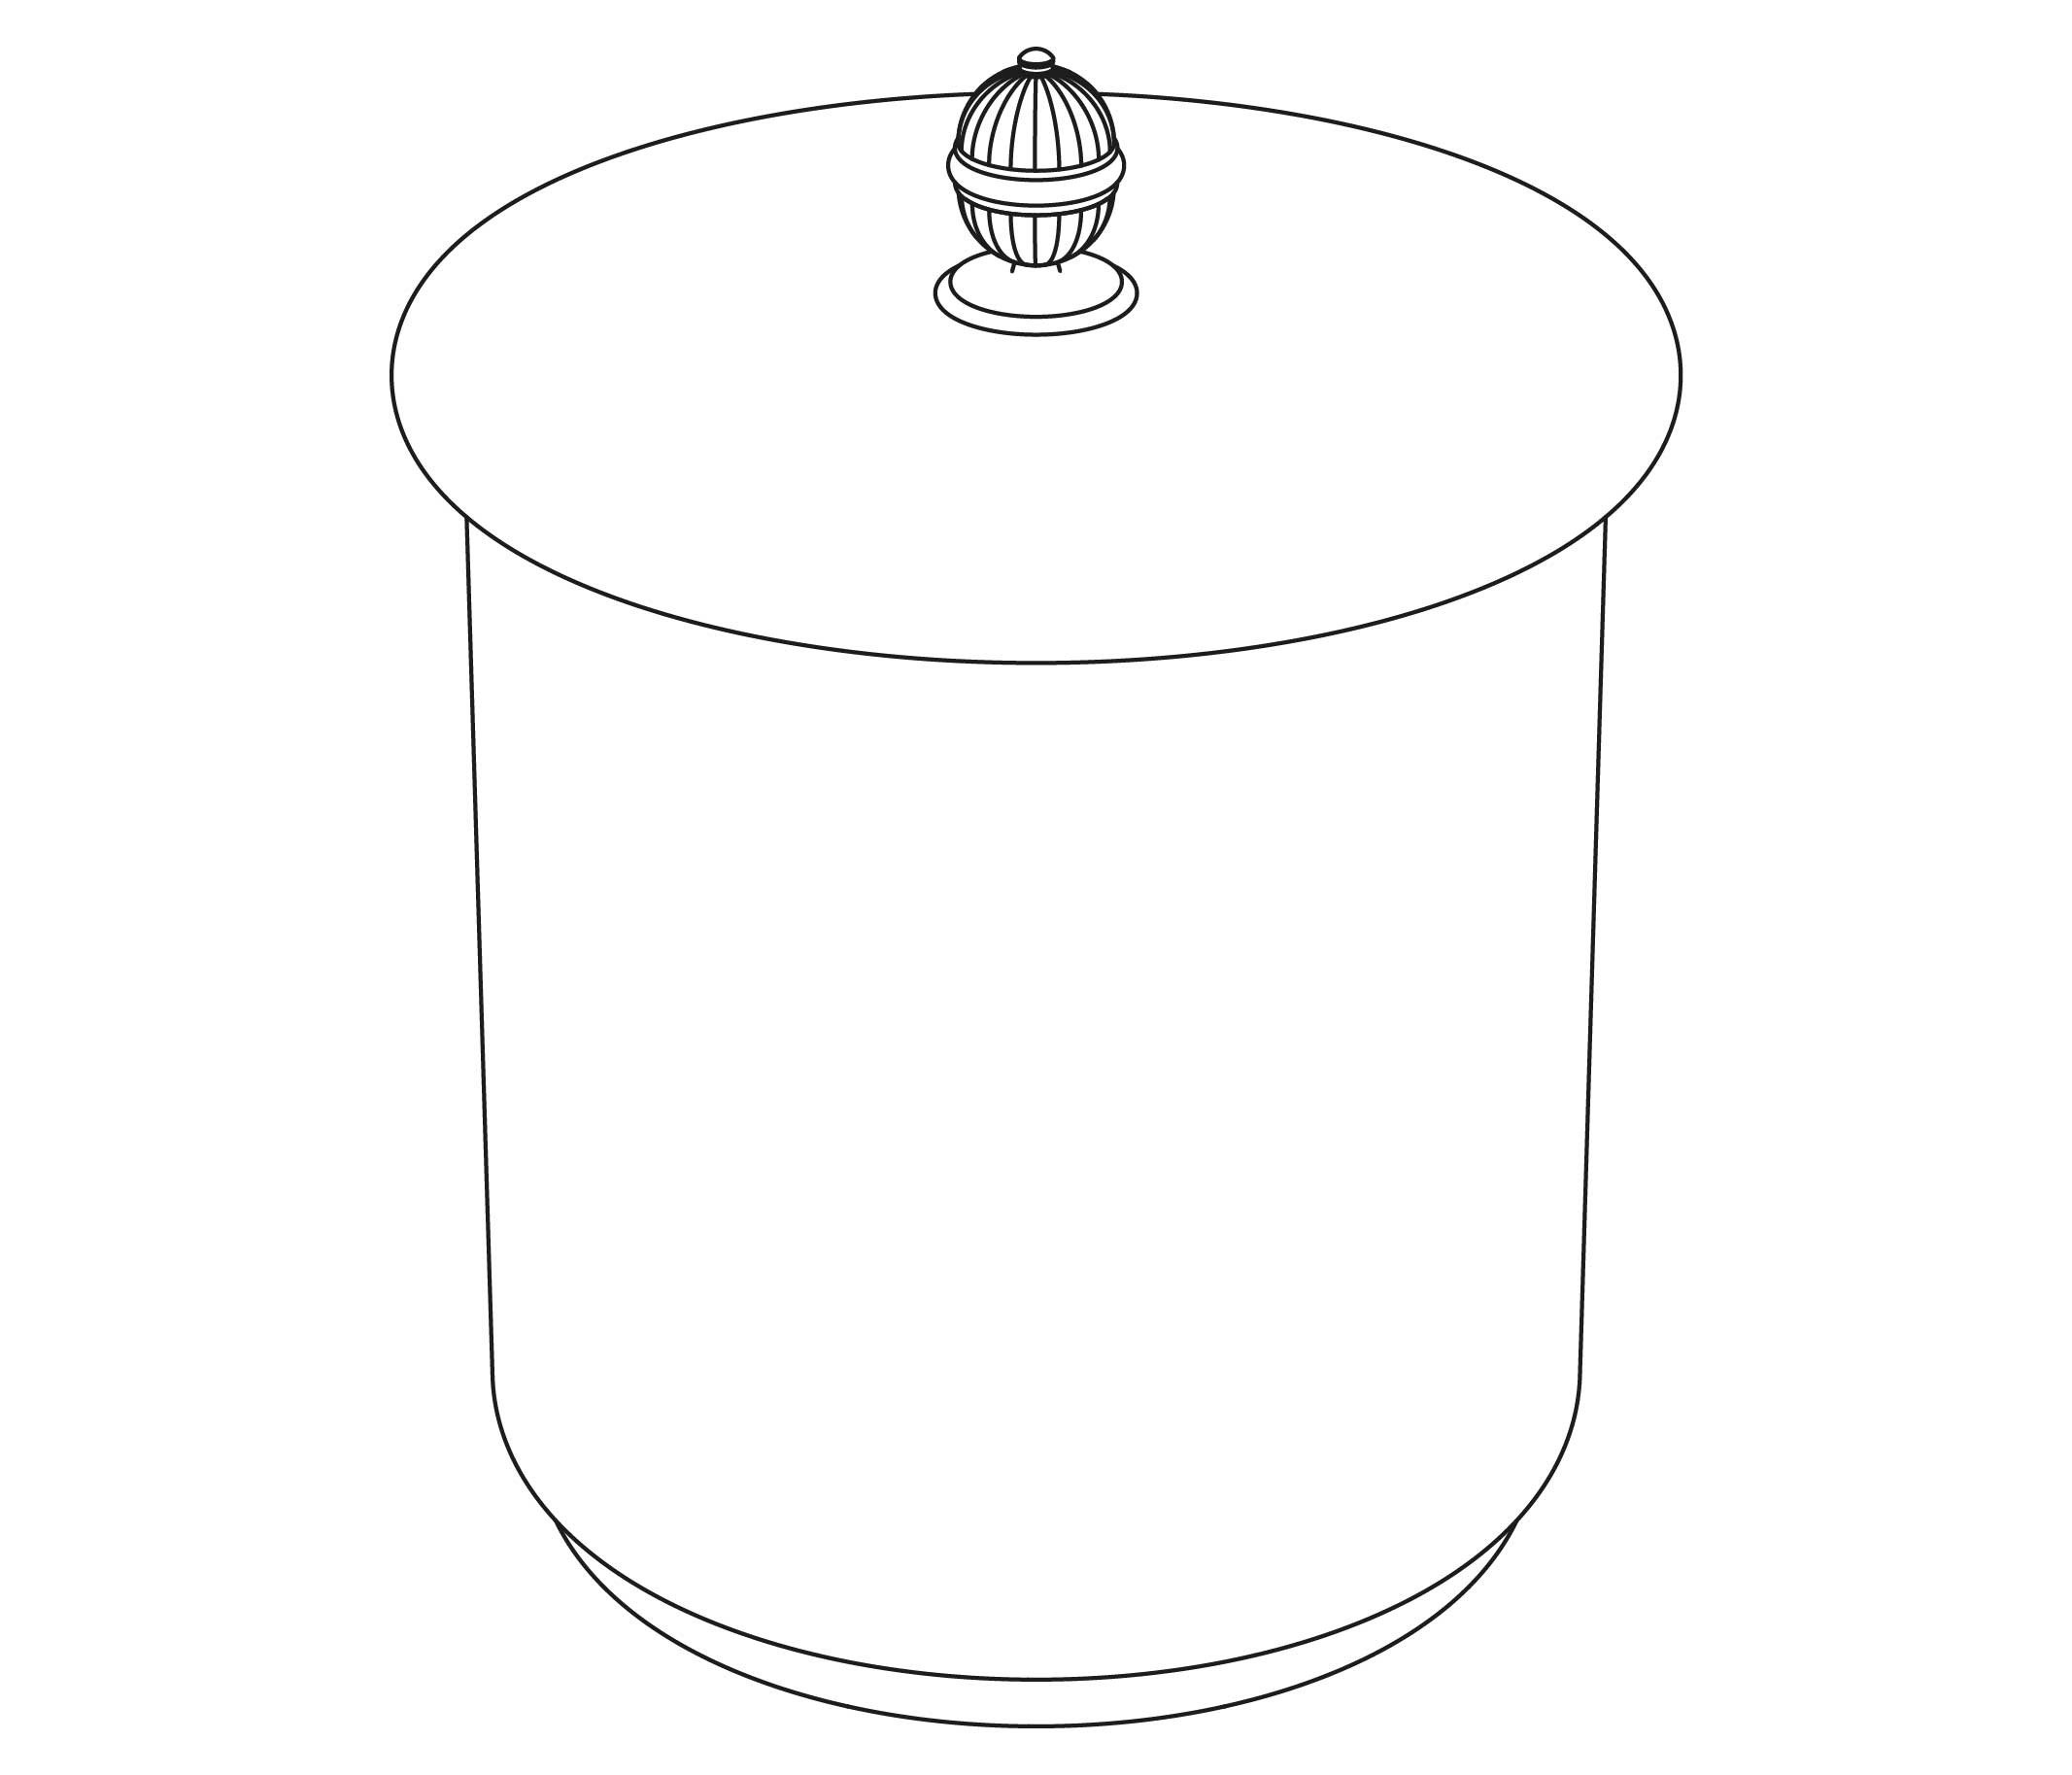 S126-577 Bin with cover